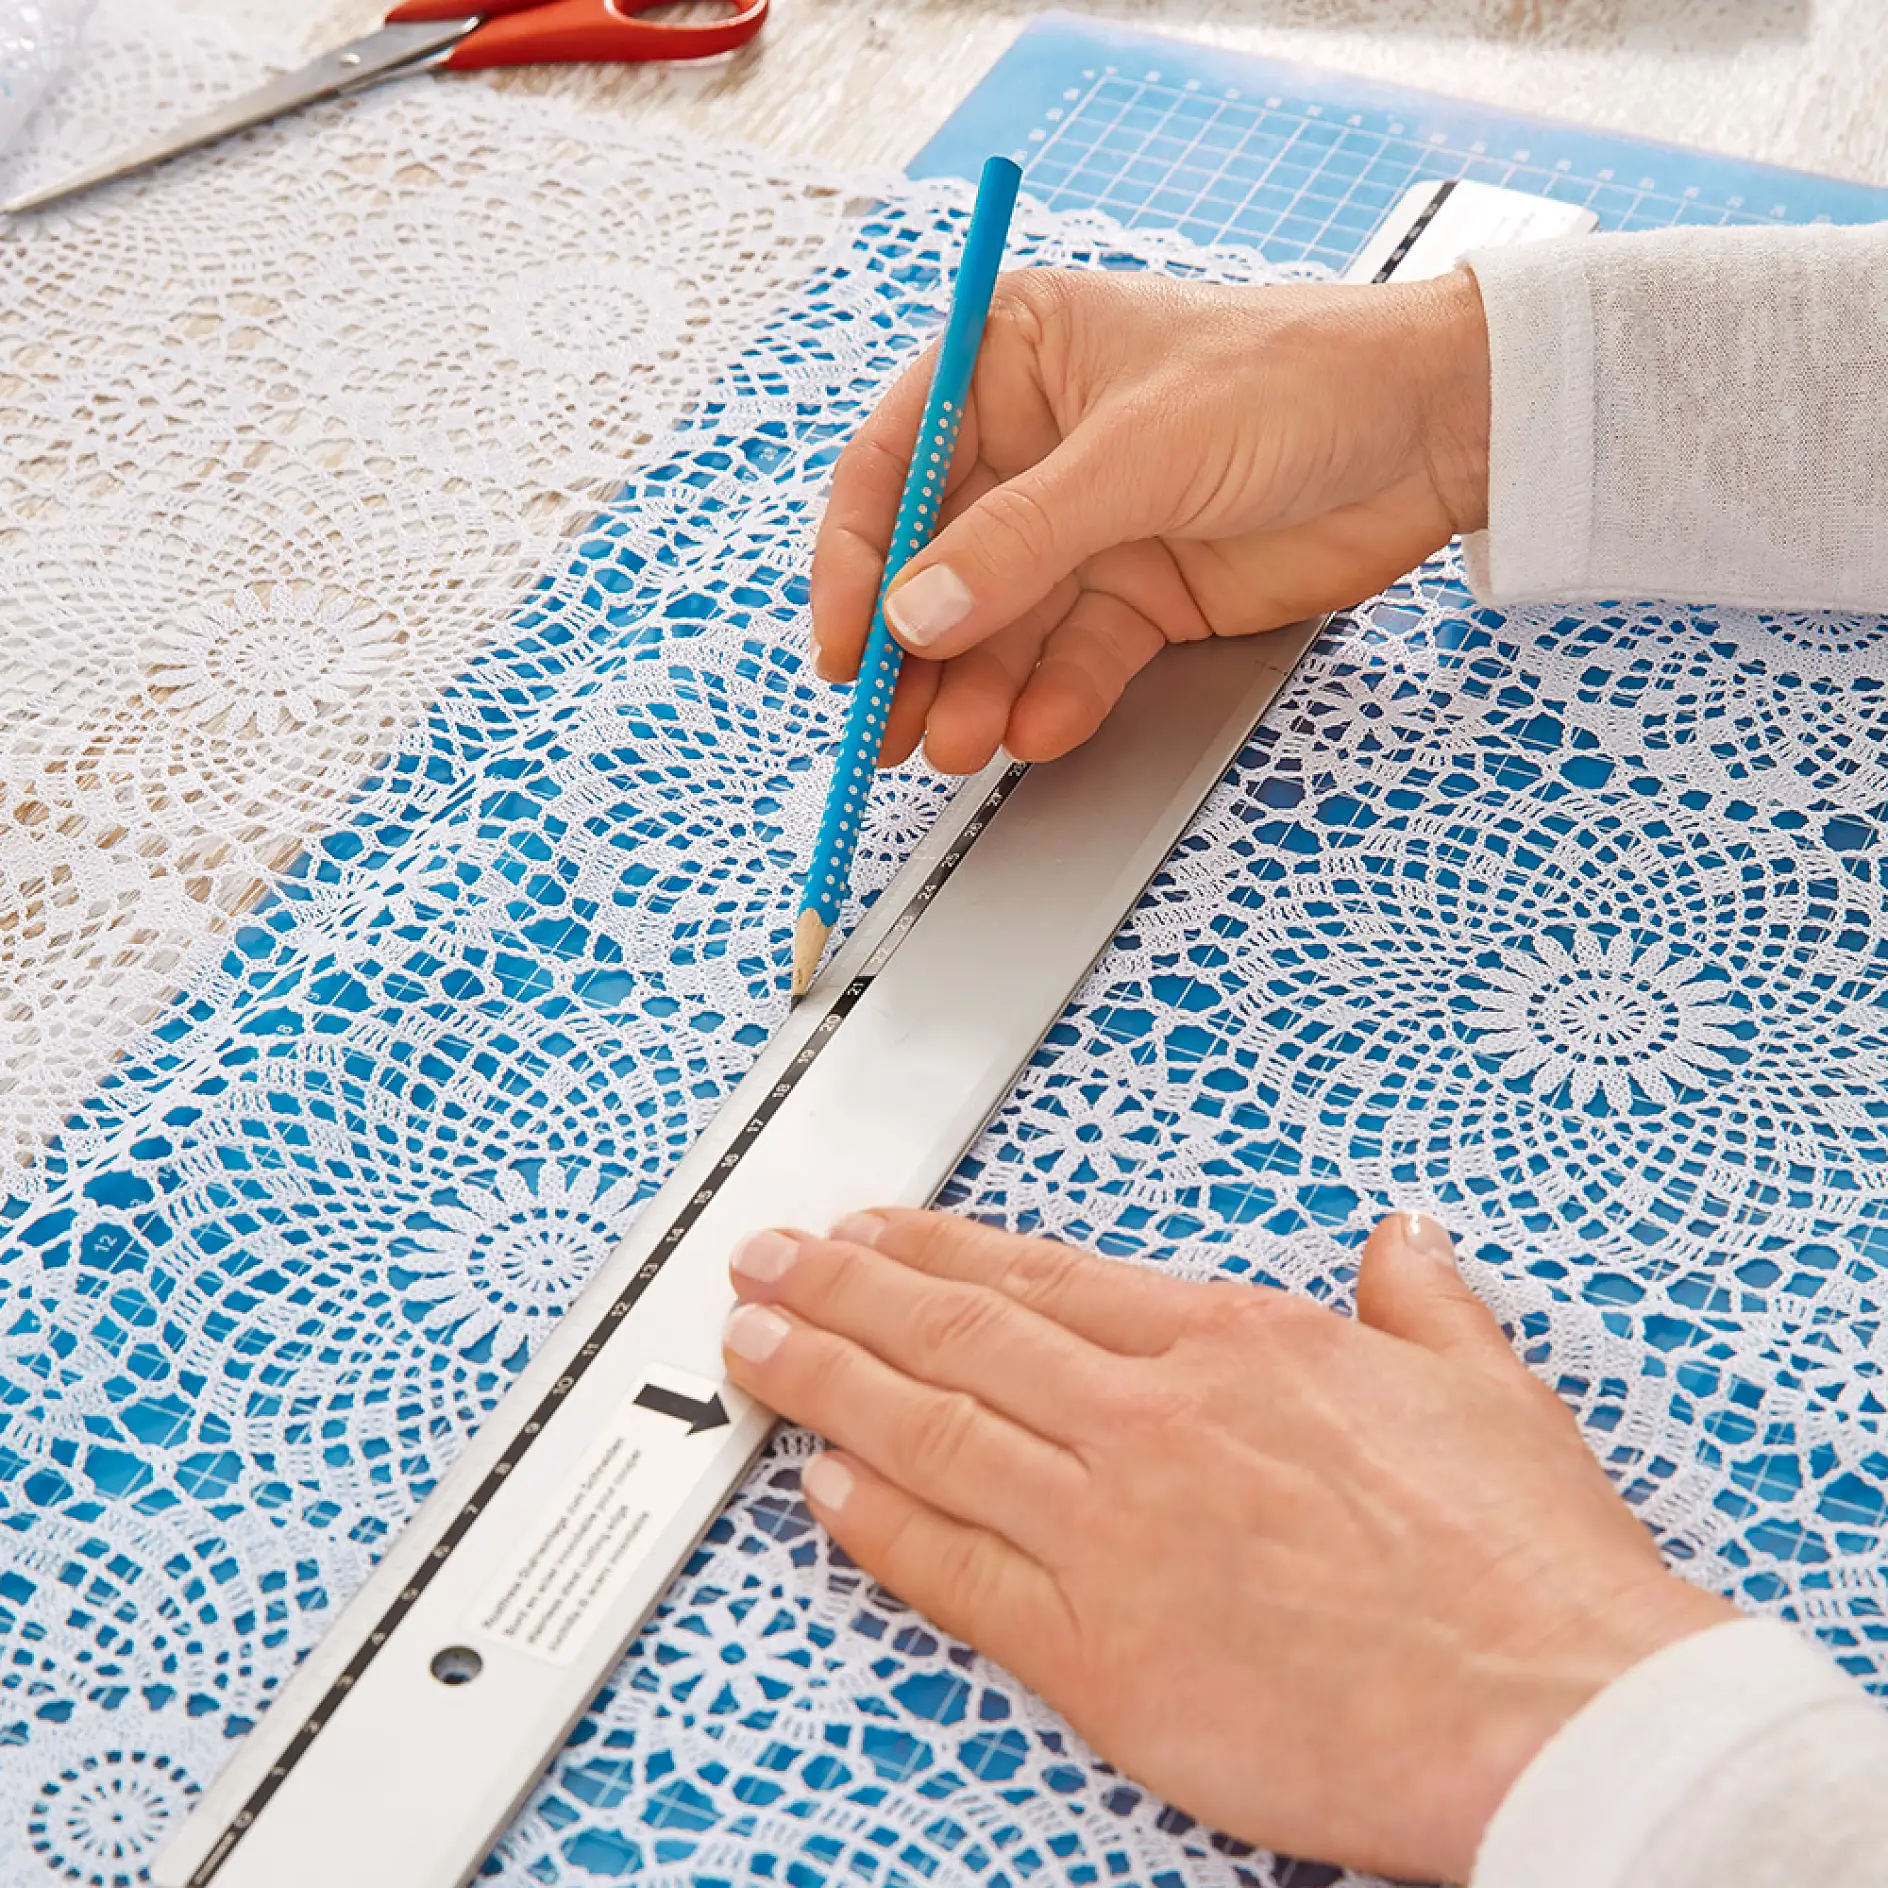 Measuring and marking while making a DIY lace window treatment